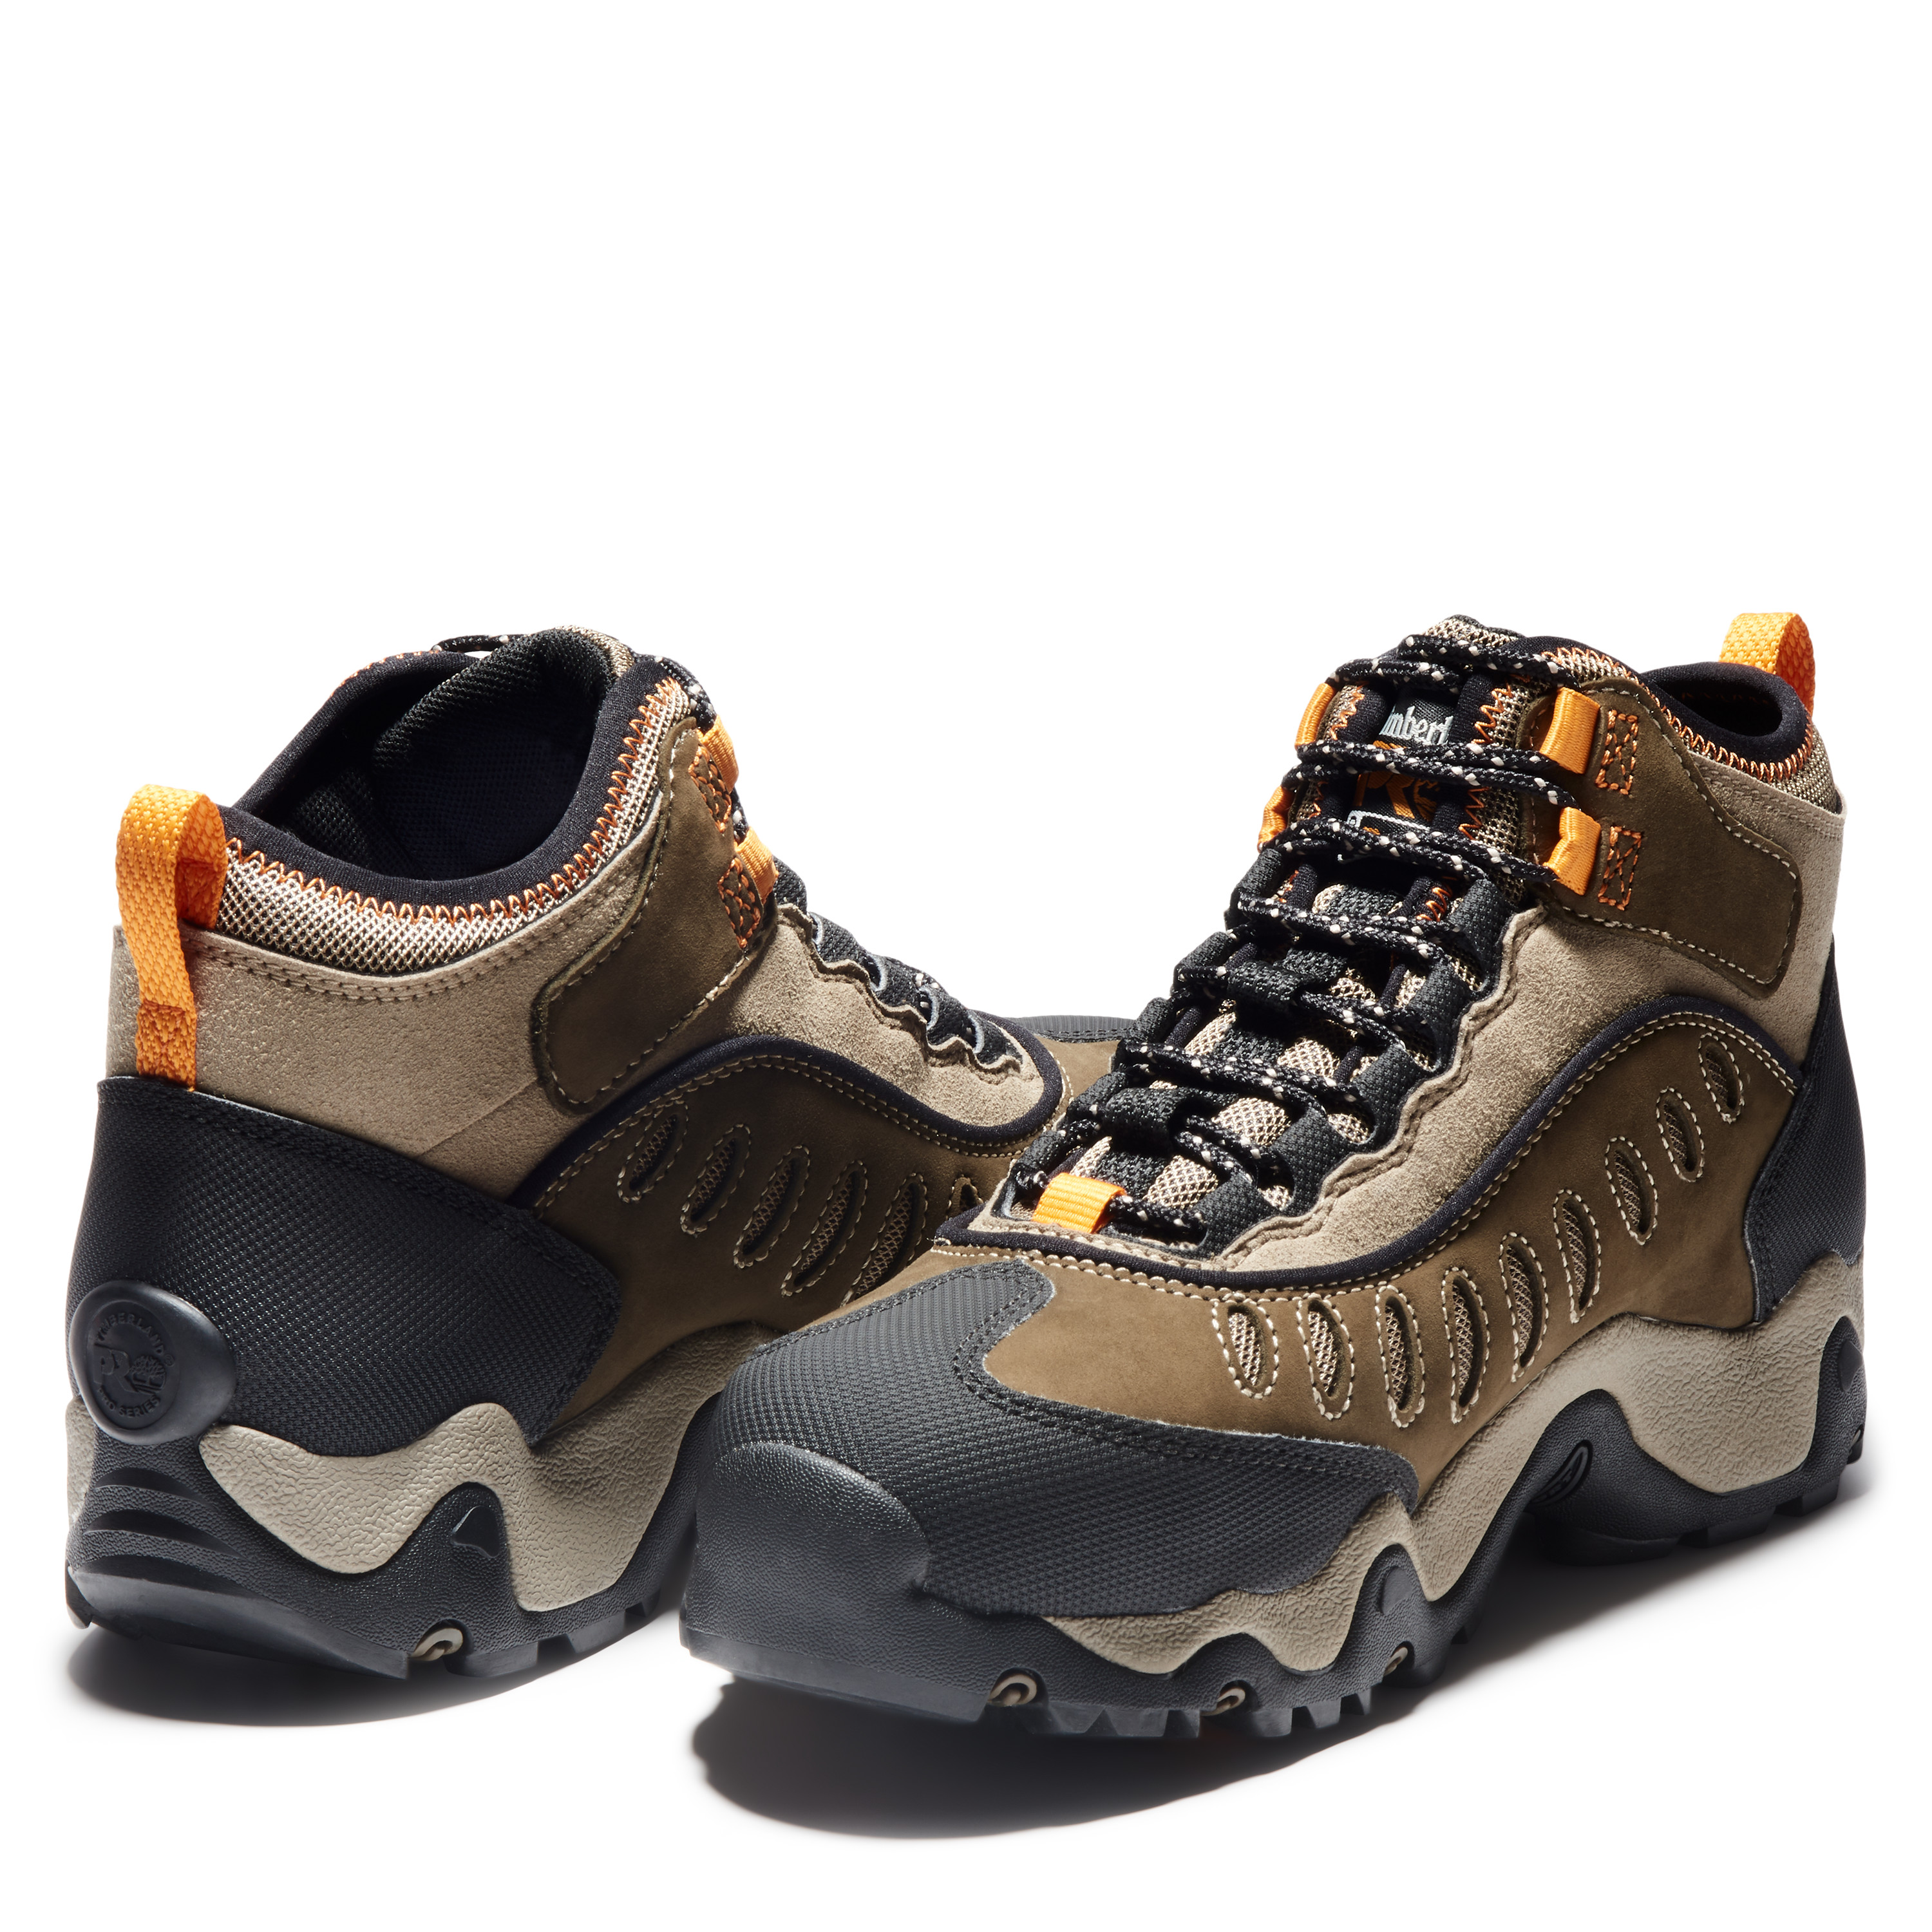 Timberland PRO Men's Mudslinger Steel Toe Waterproof Work Boots from GME Supply